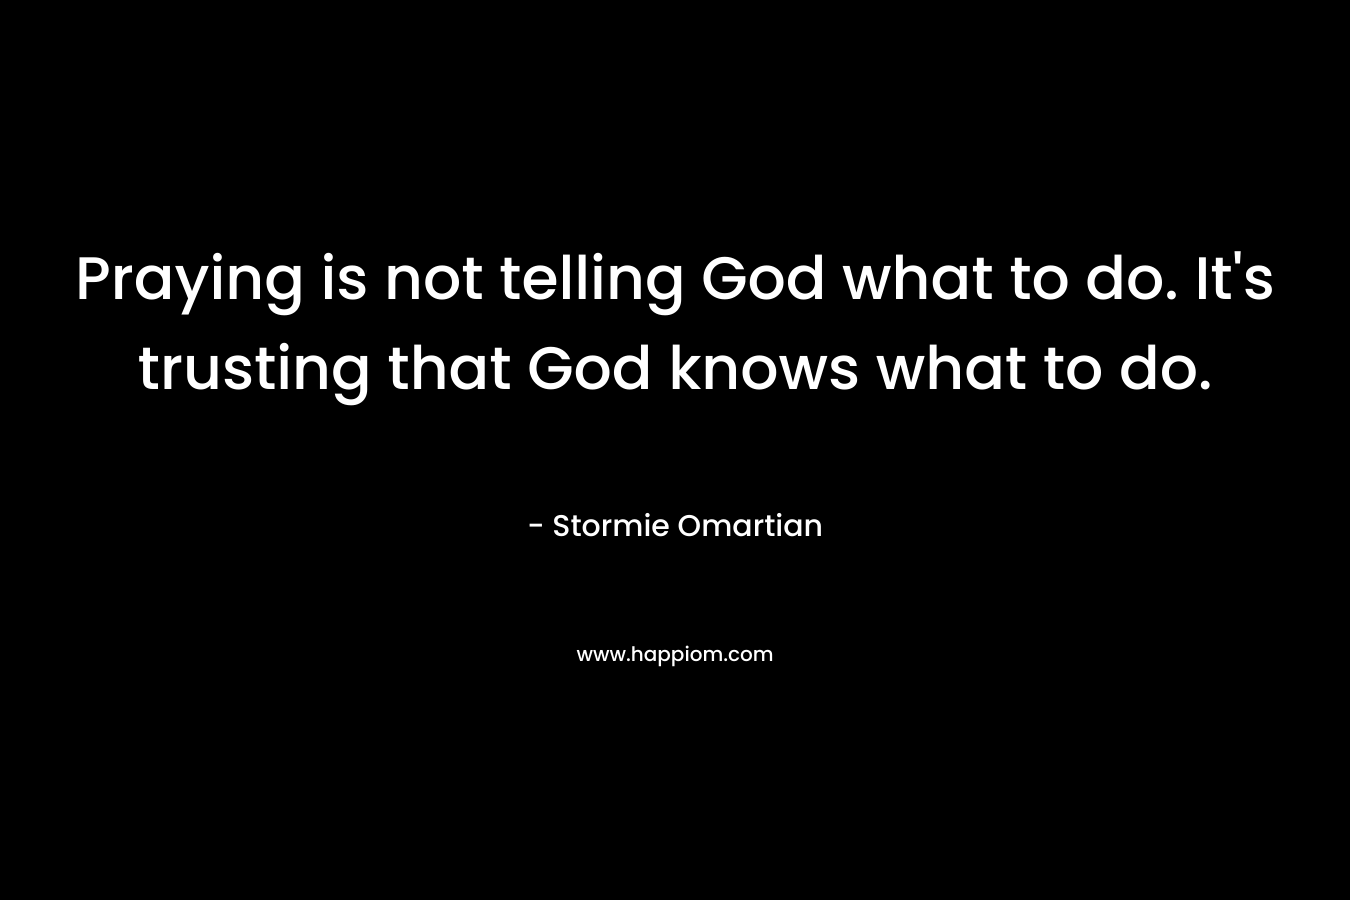 Praying is not telling God what to do. It's trusting that God knows what to do.